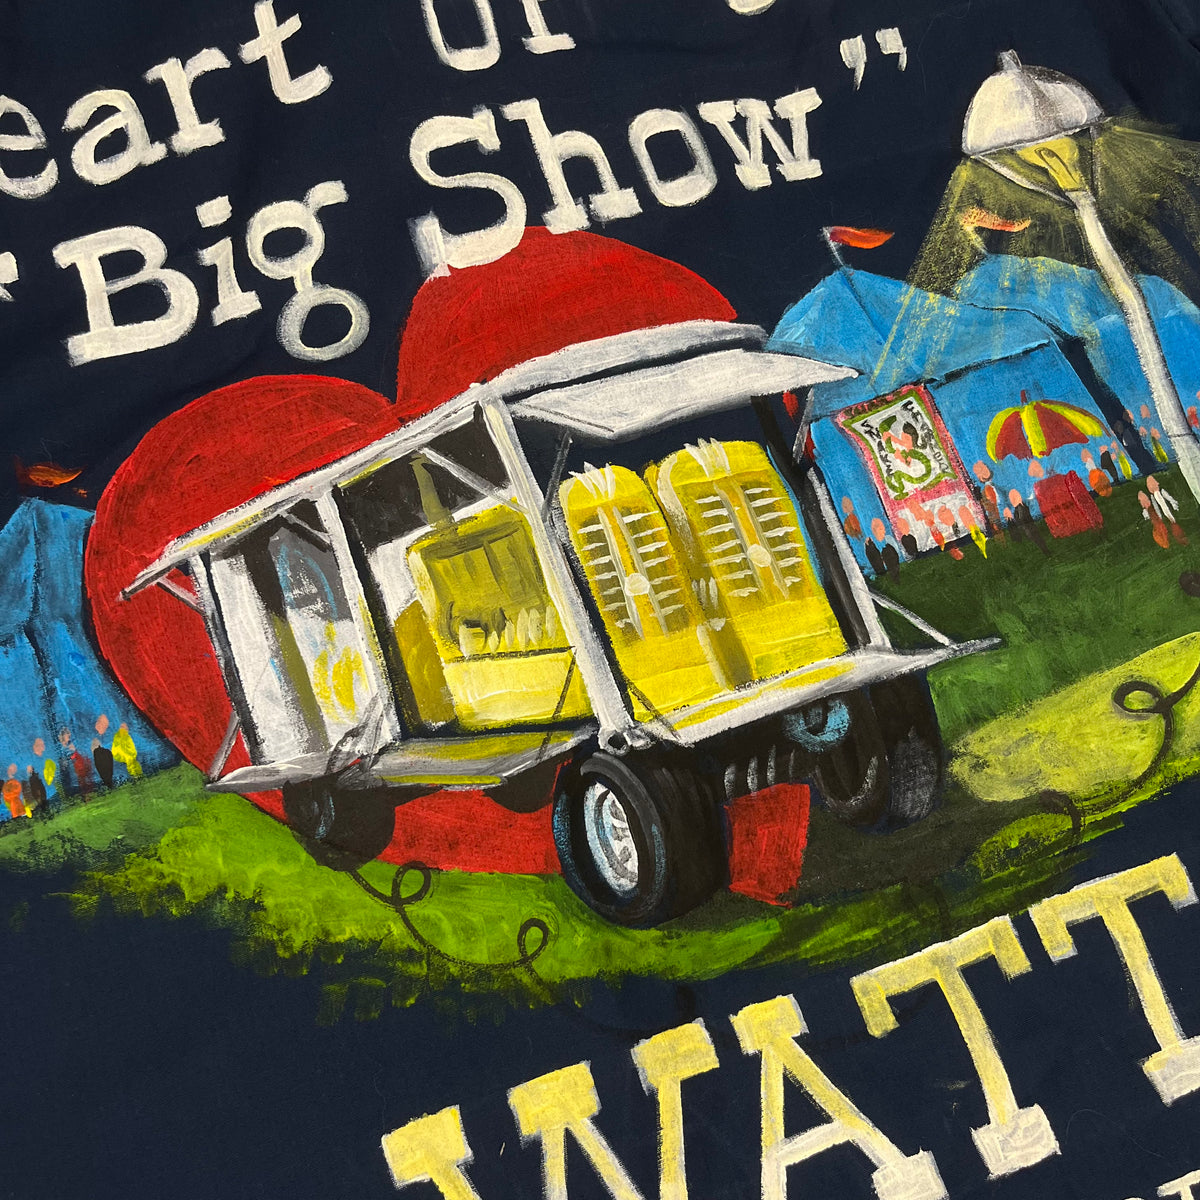 Vintage Watt Electrical Systems &quot;Heart Of The Big Show&quot; Hand Painted Work Shirt